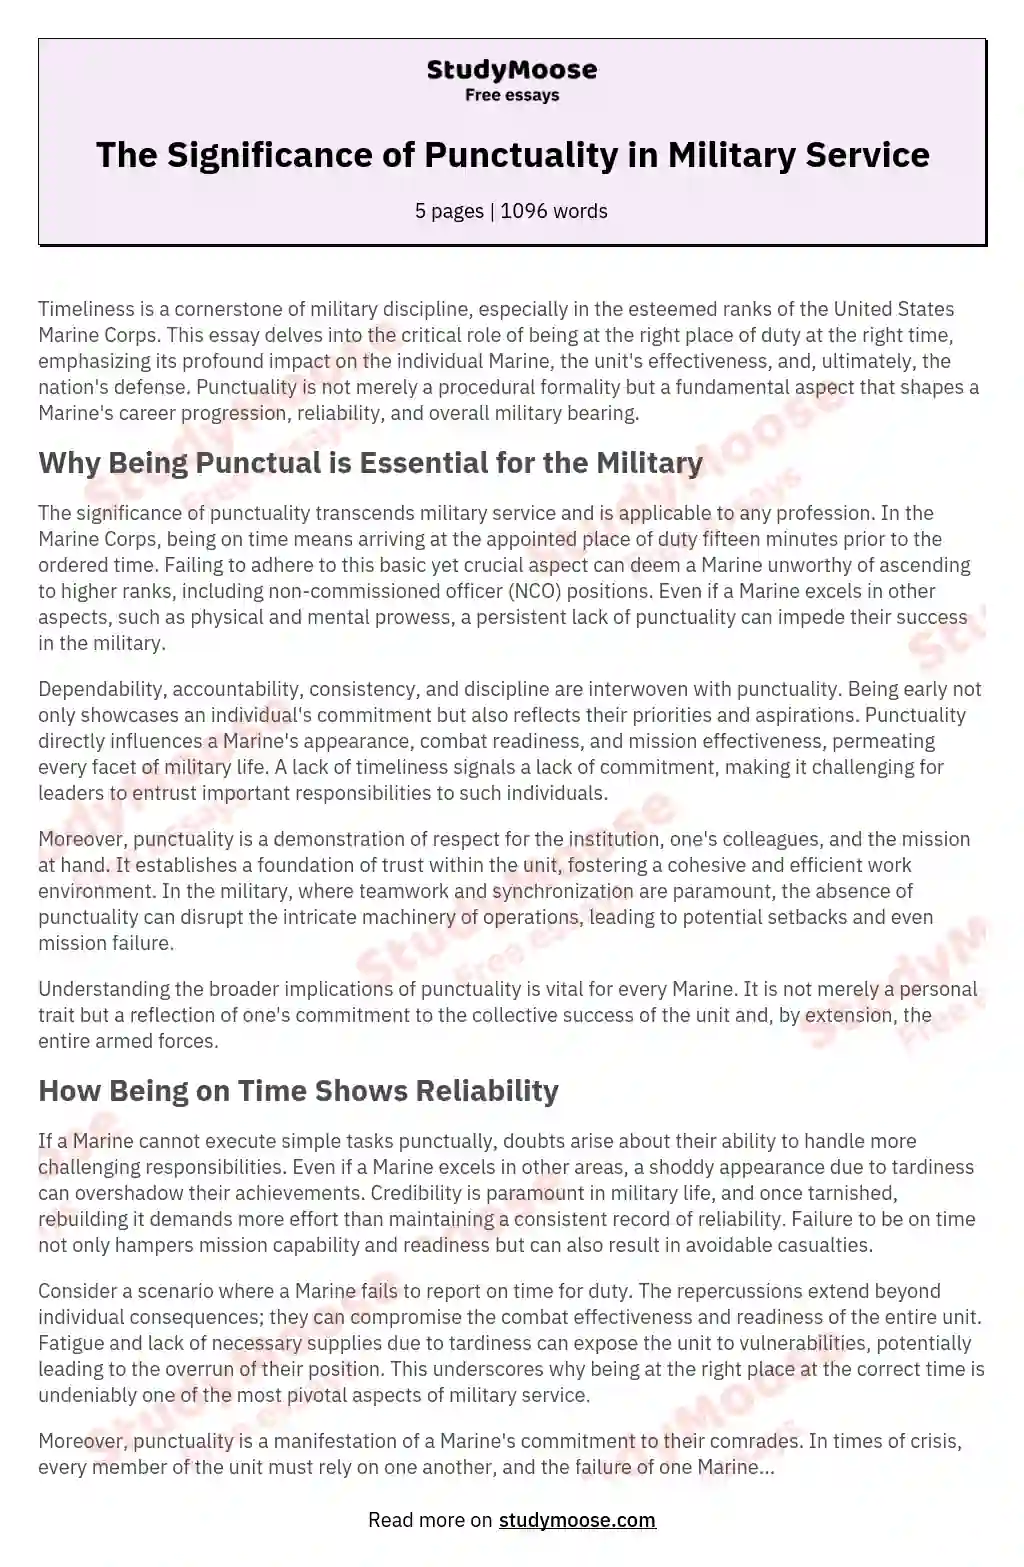 The Significance of Punctuality in Military Service essay